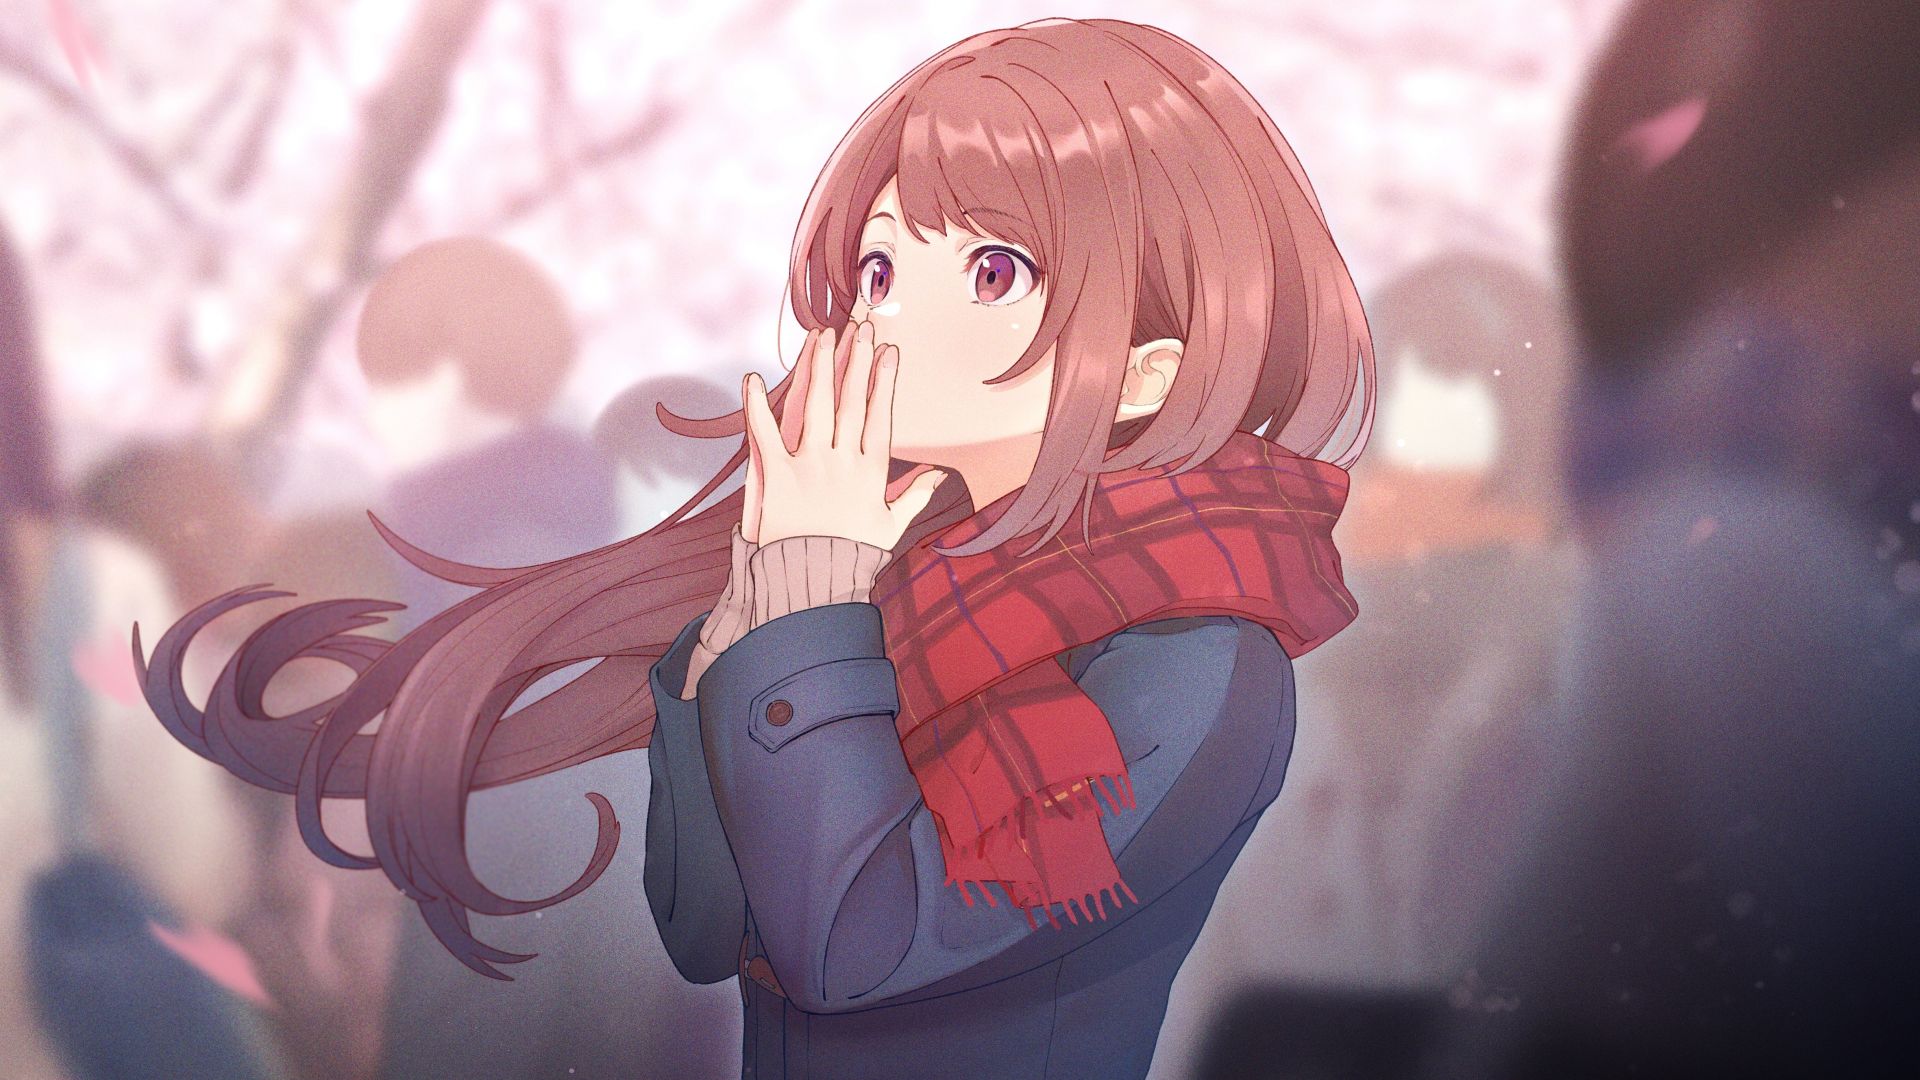 Desktop wallpaper cute, anime girl, pretty eyes, winter, red scarf, HD image, picture, background, 586af7